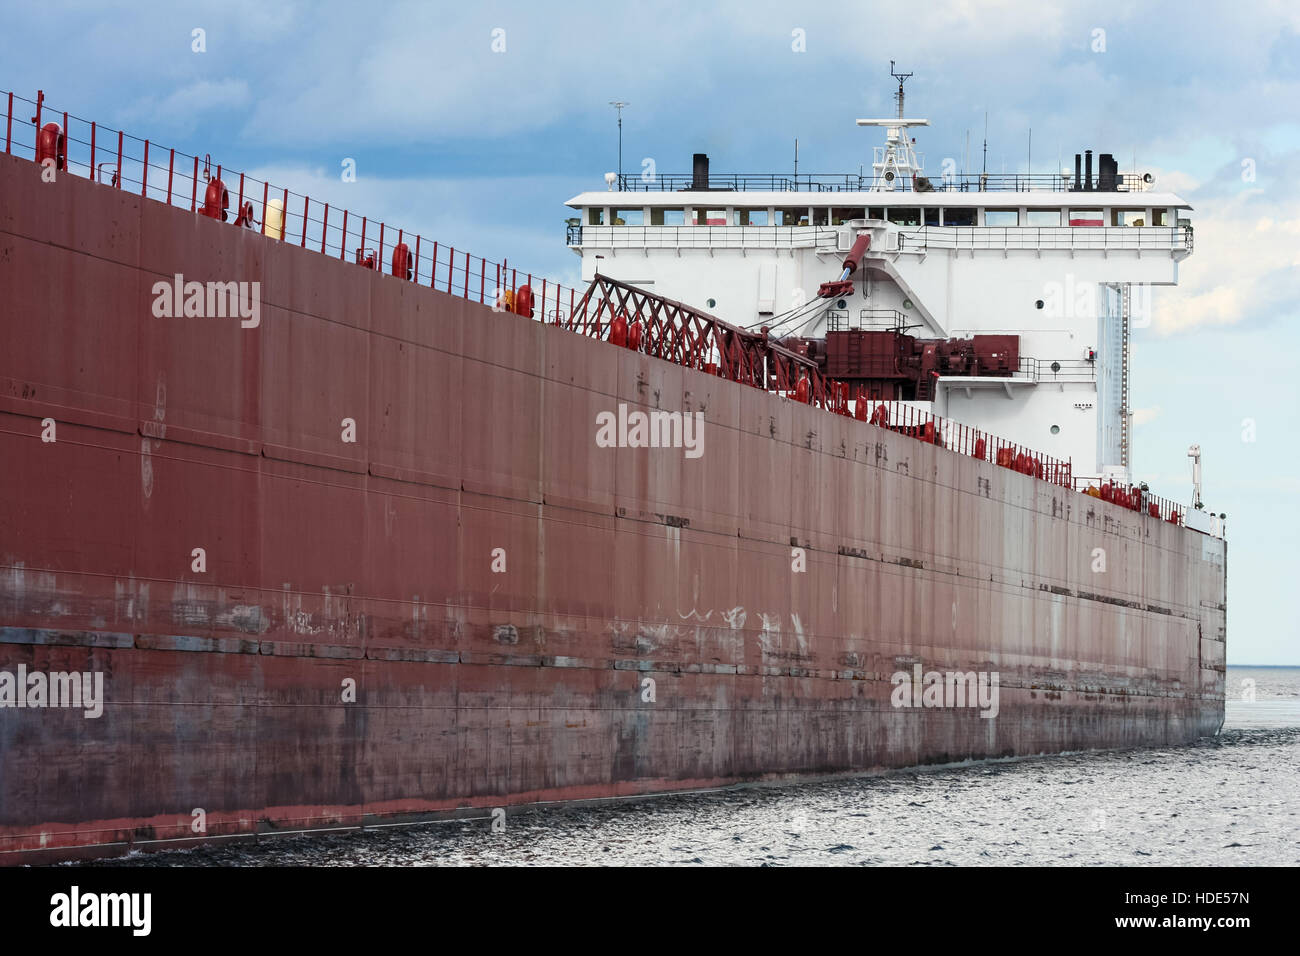 A huge lake freighter on Lake Superior enters the Duluth Ship Canal on a cloudy day. Stock Photo